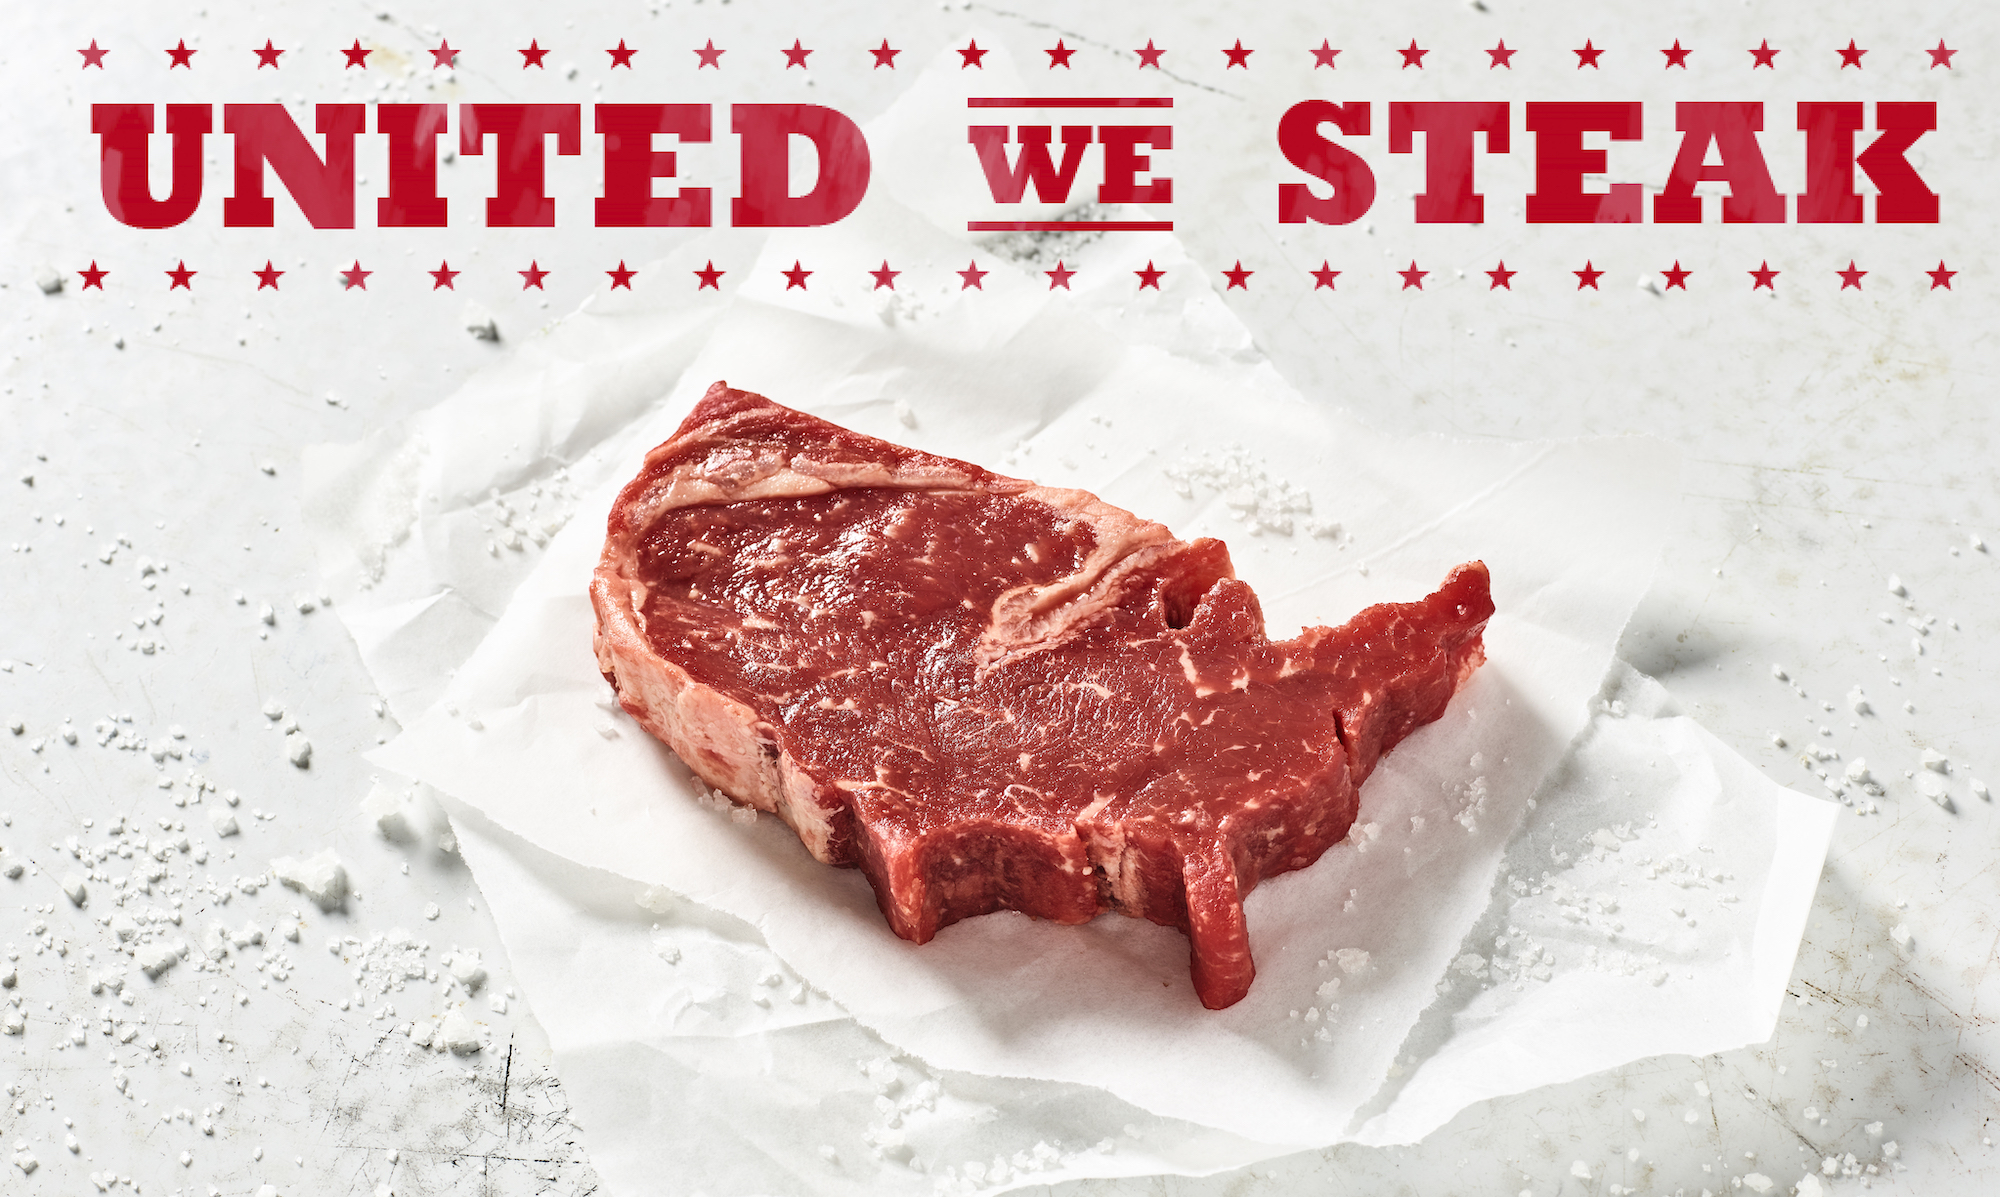 United We Steak Beef Promotion Campaign Showing Good Results Says NCBA's Alisa Harrison